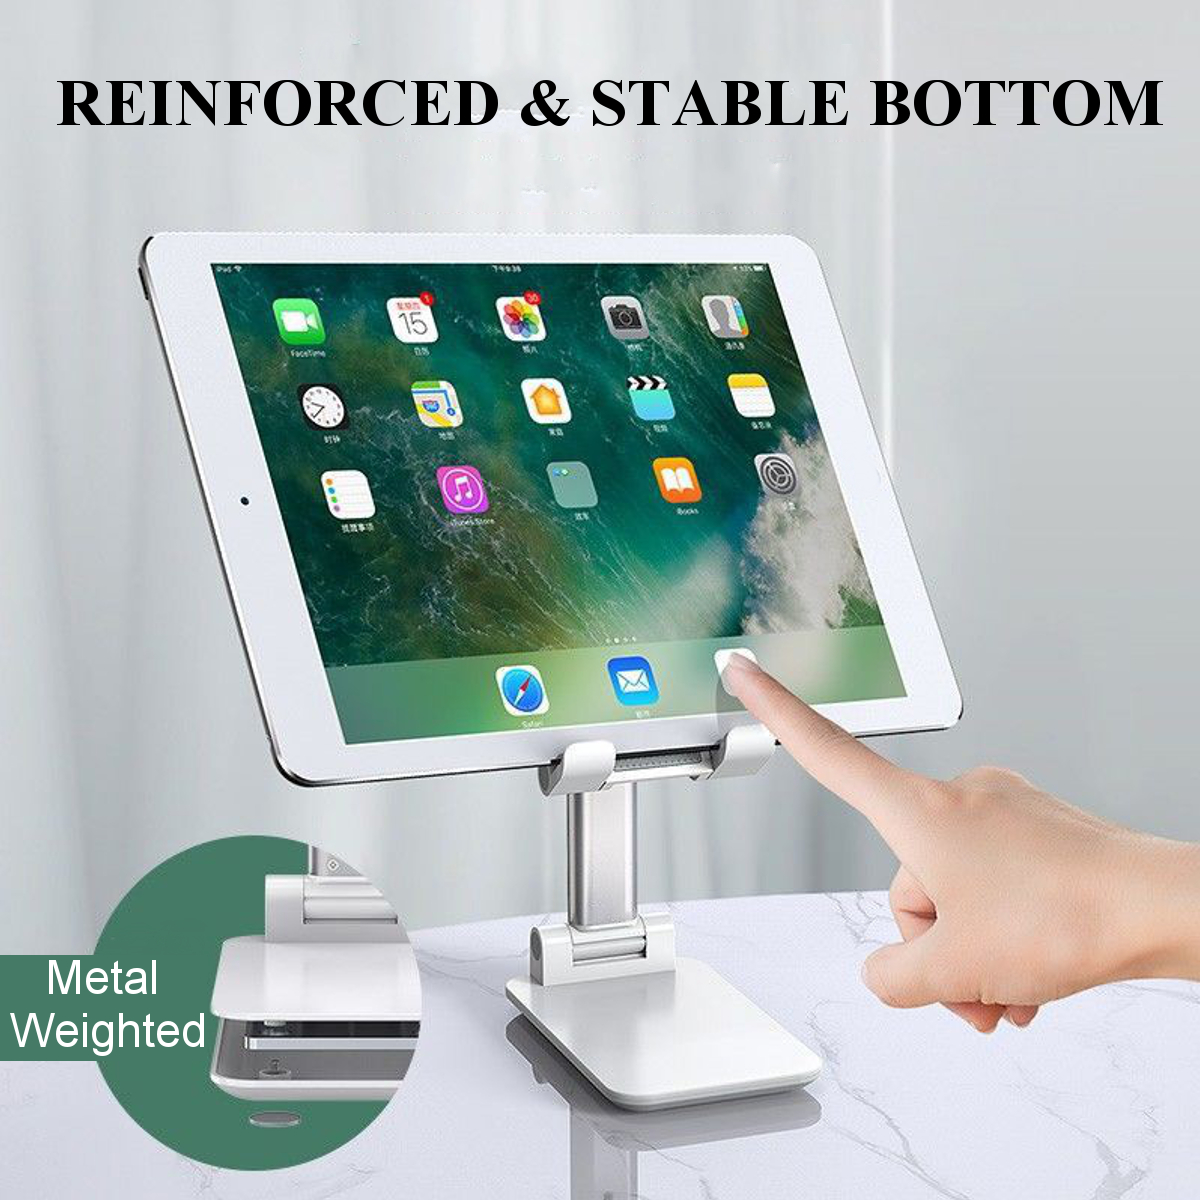 CCT4-Universal-Folding-Telescopic-Desktop-Mobile-Phone-Tablet-Holder-Stand-for-iPad-Air-for-iPhone-1-1811828-7